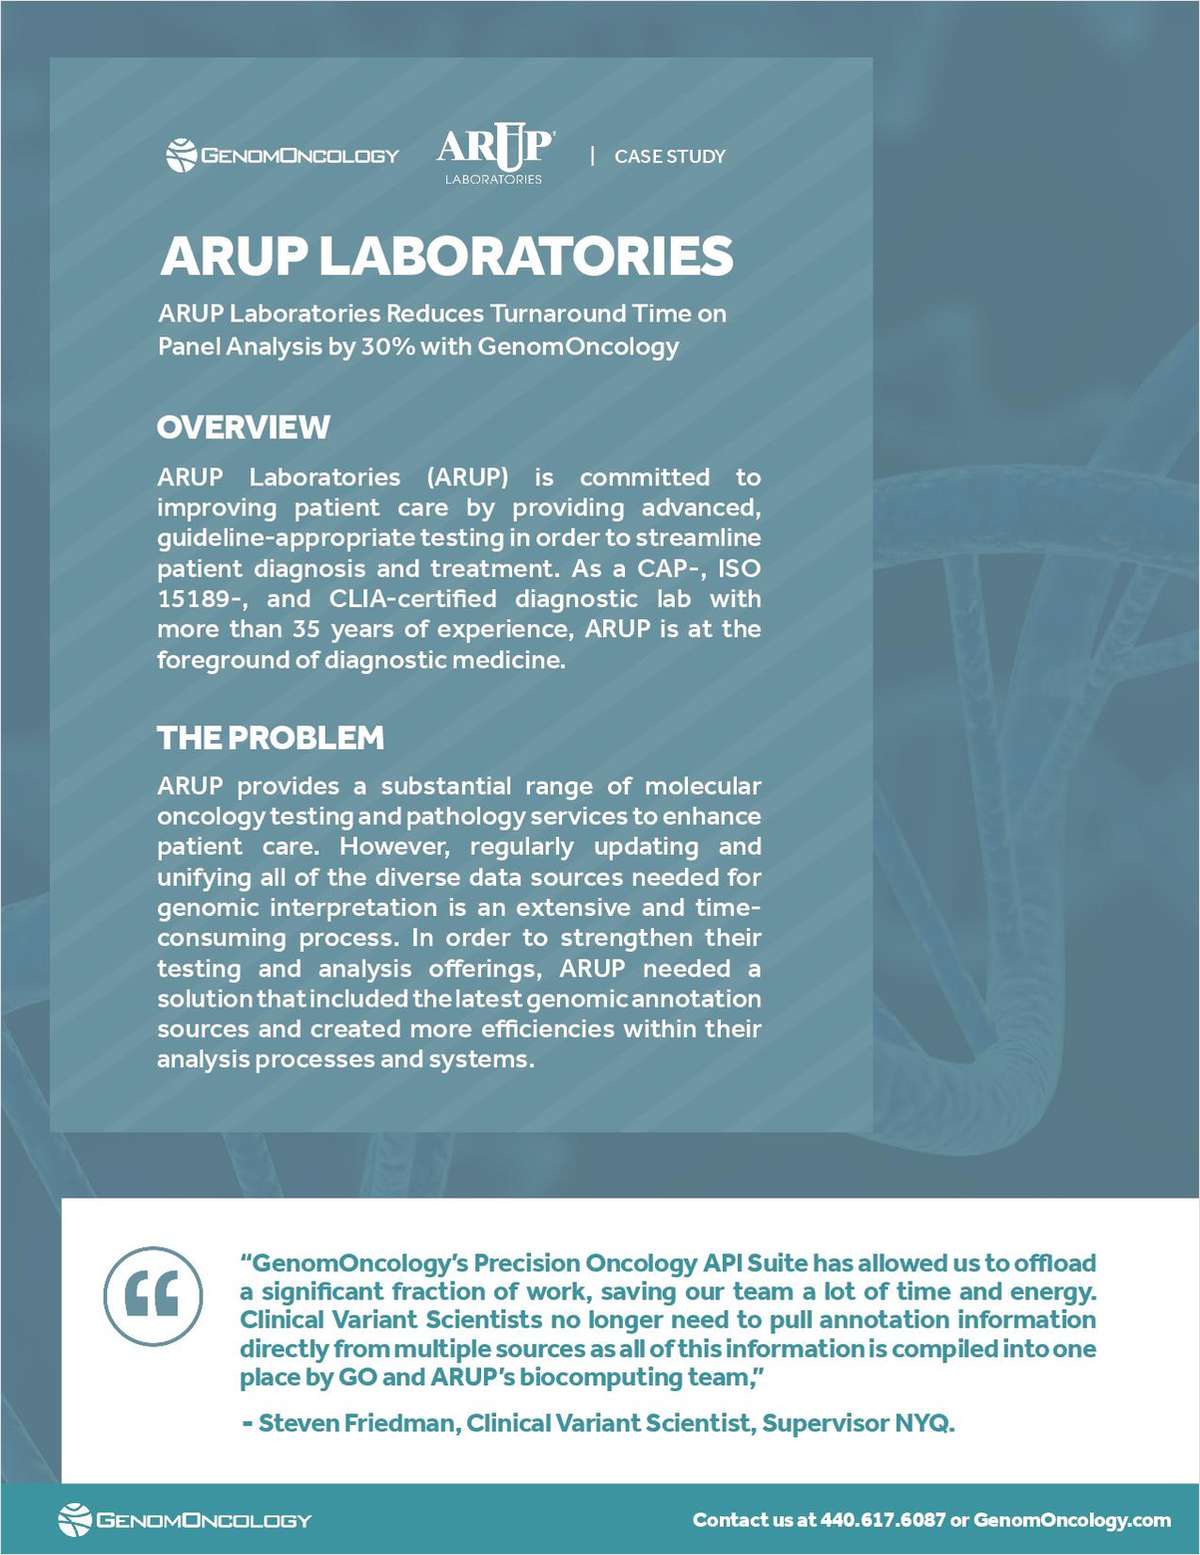 ARUP Laboratories Reduces Turnaround Time on Panel Analysis by 30 Percent with GenomOncology